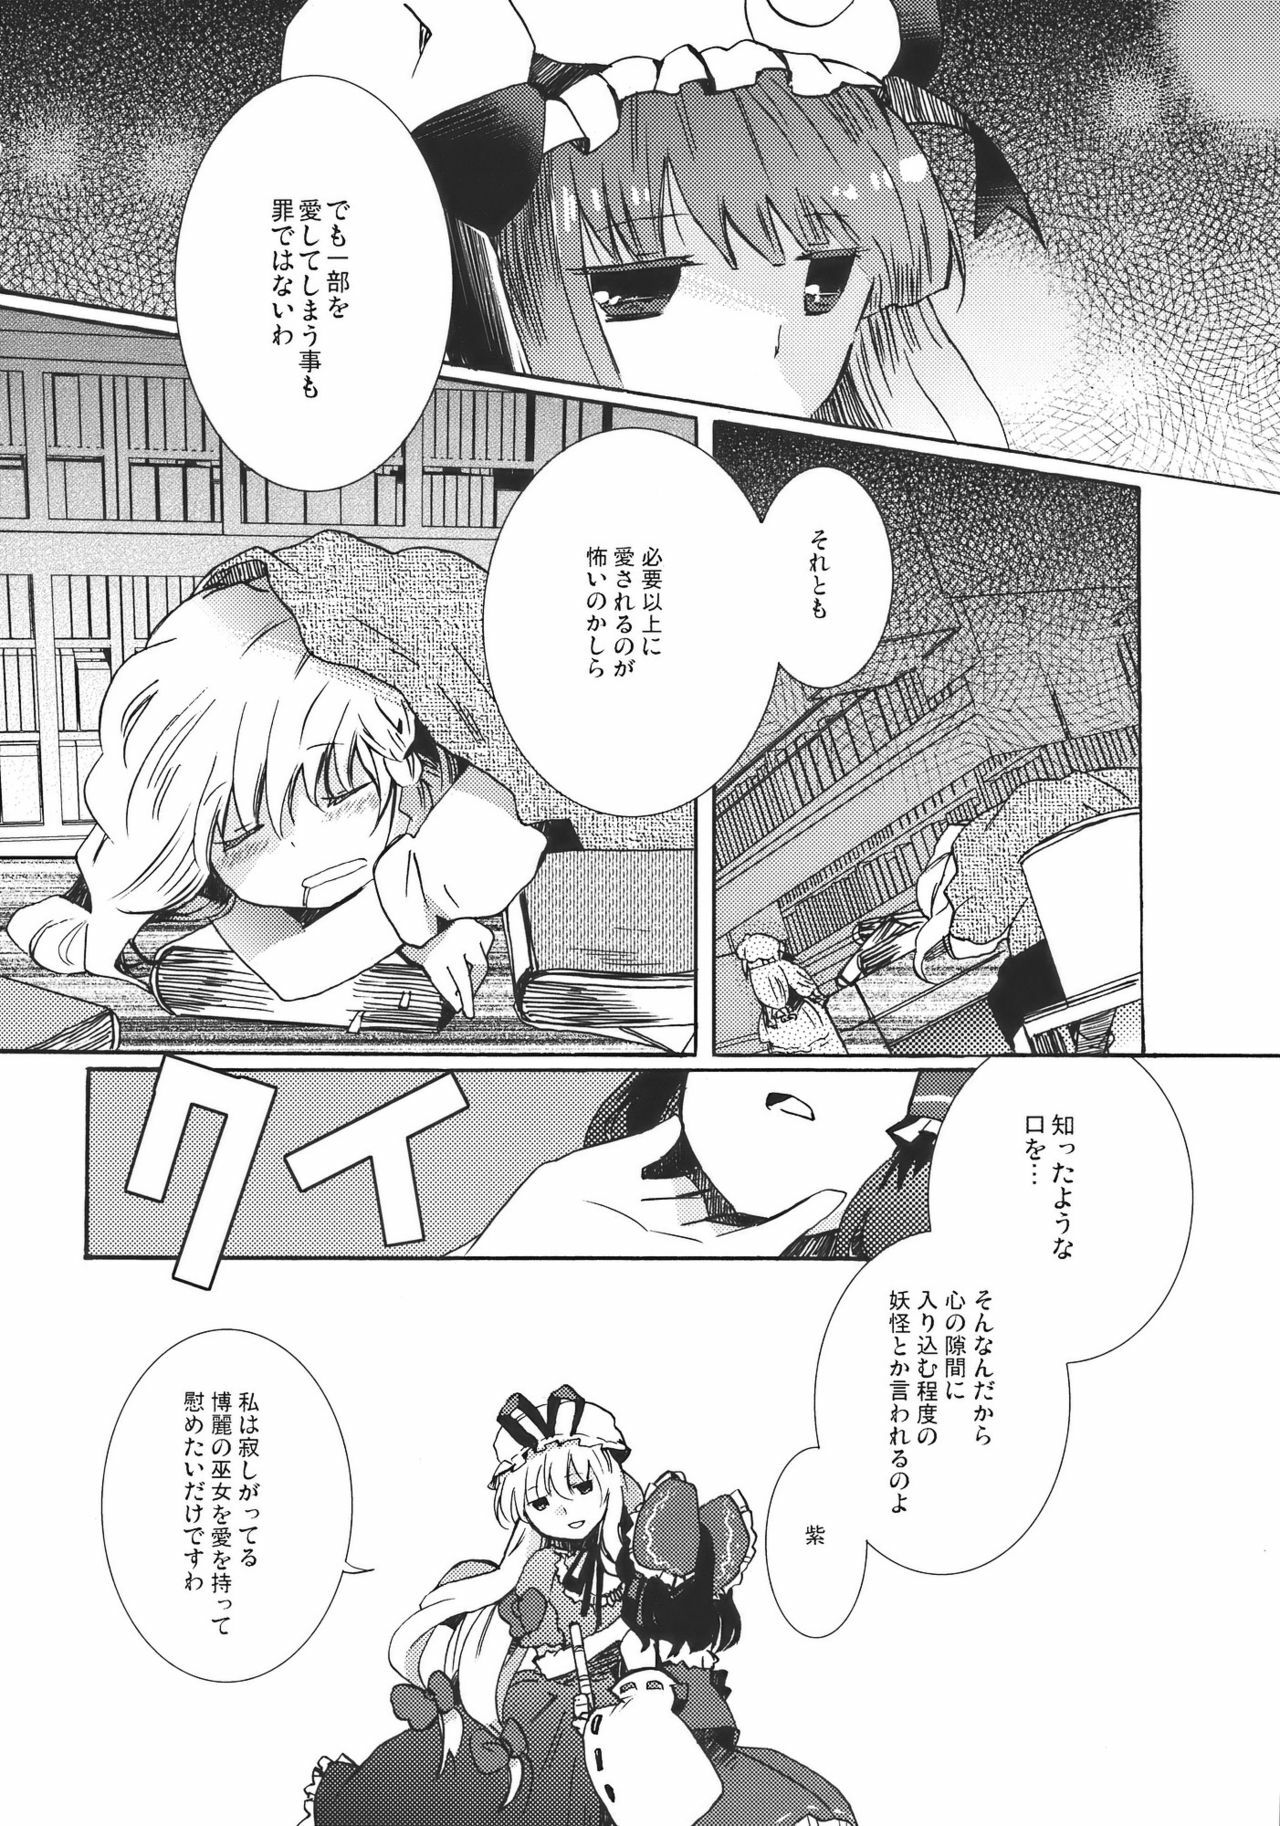 [Oimoto] Yumeiro Dolce (Touhou Project) page 10 full